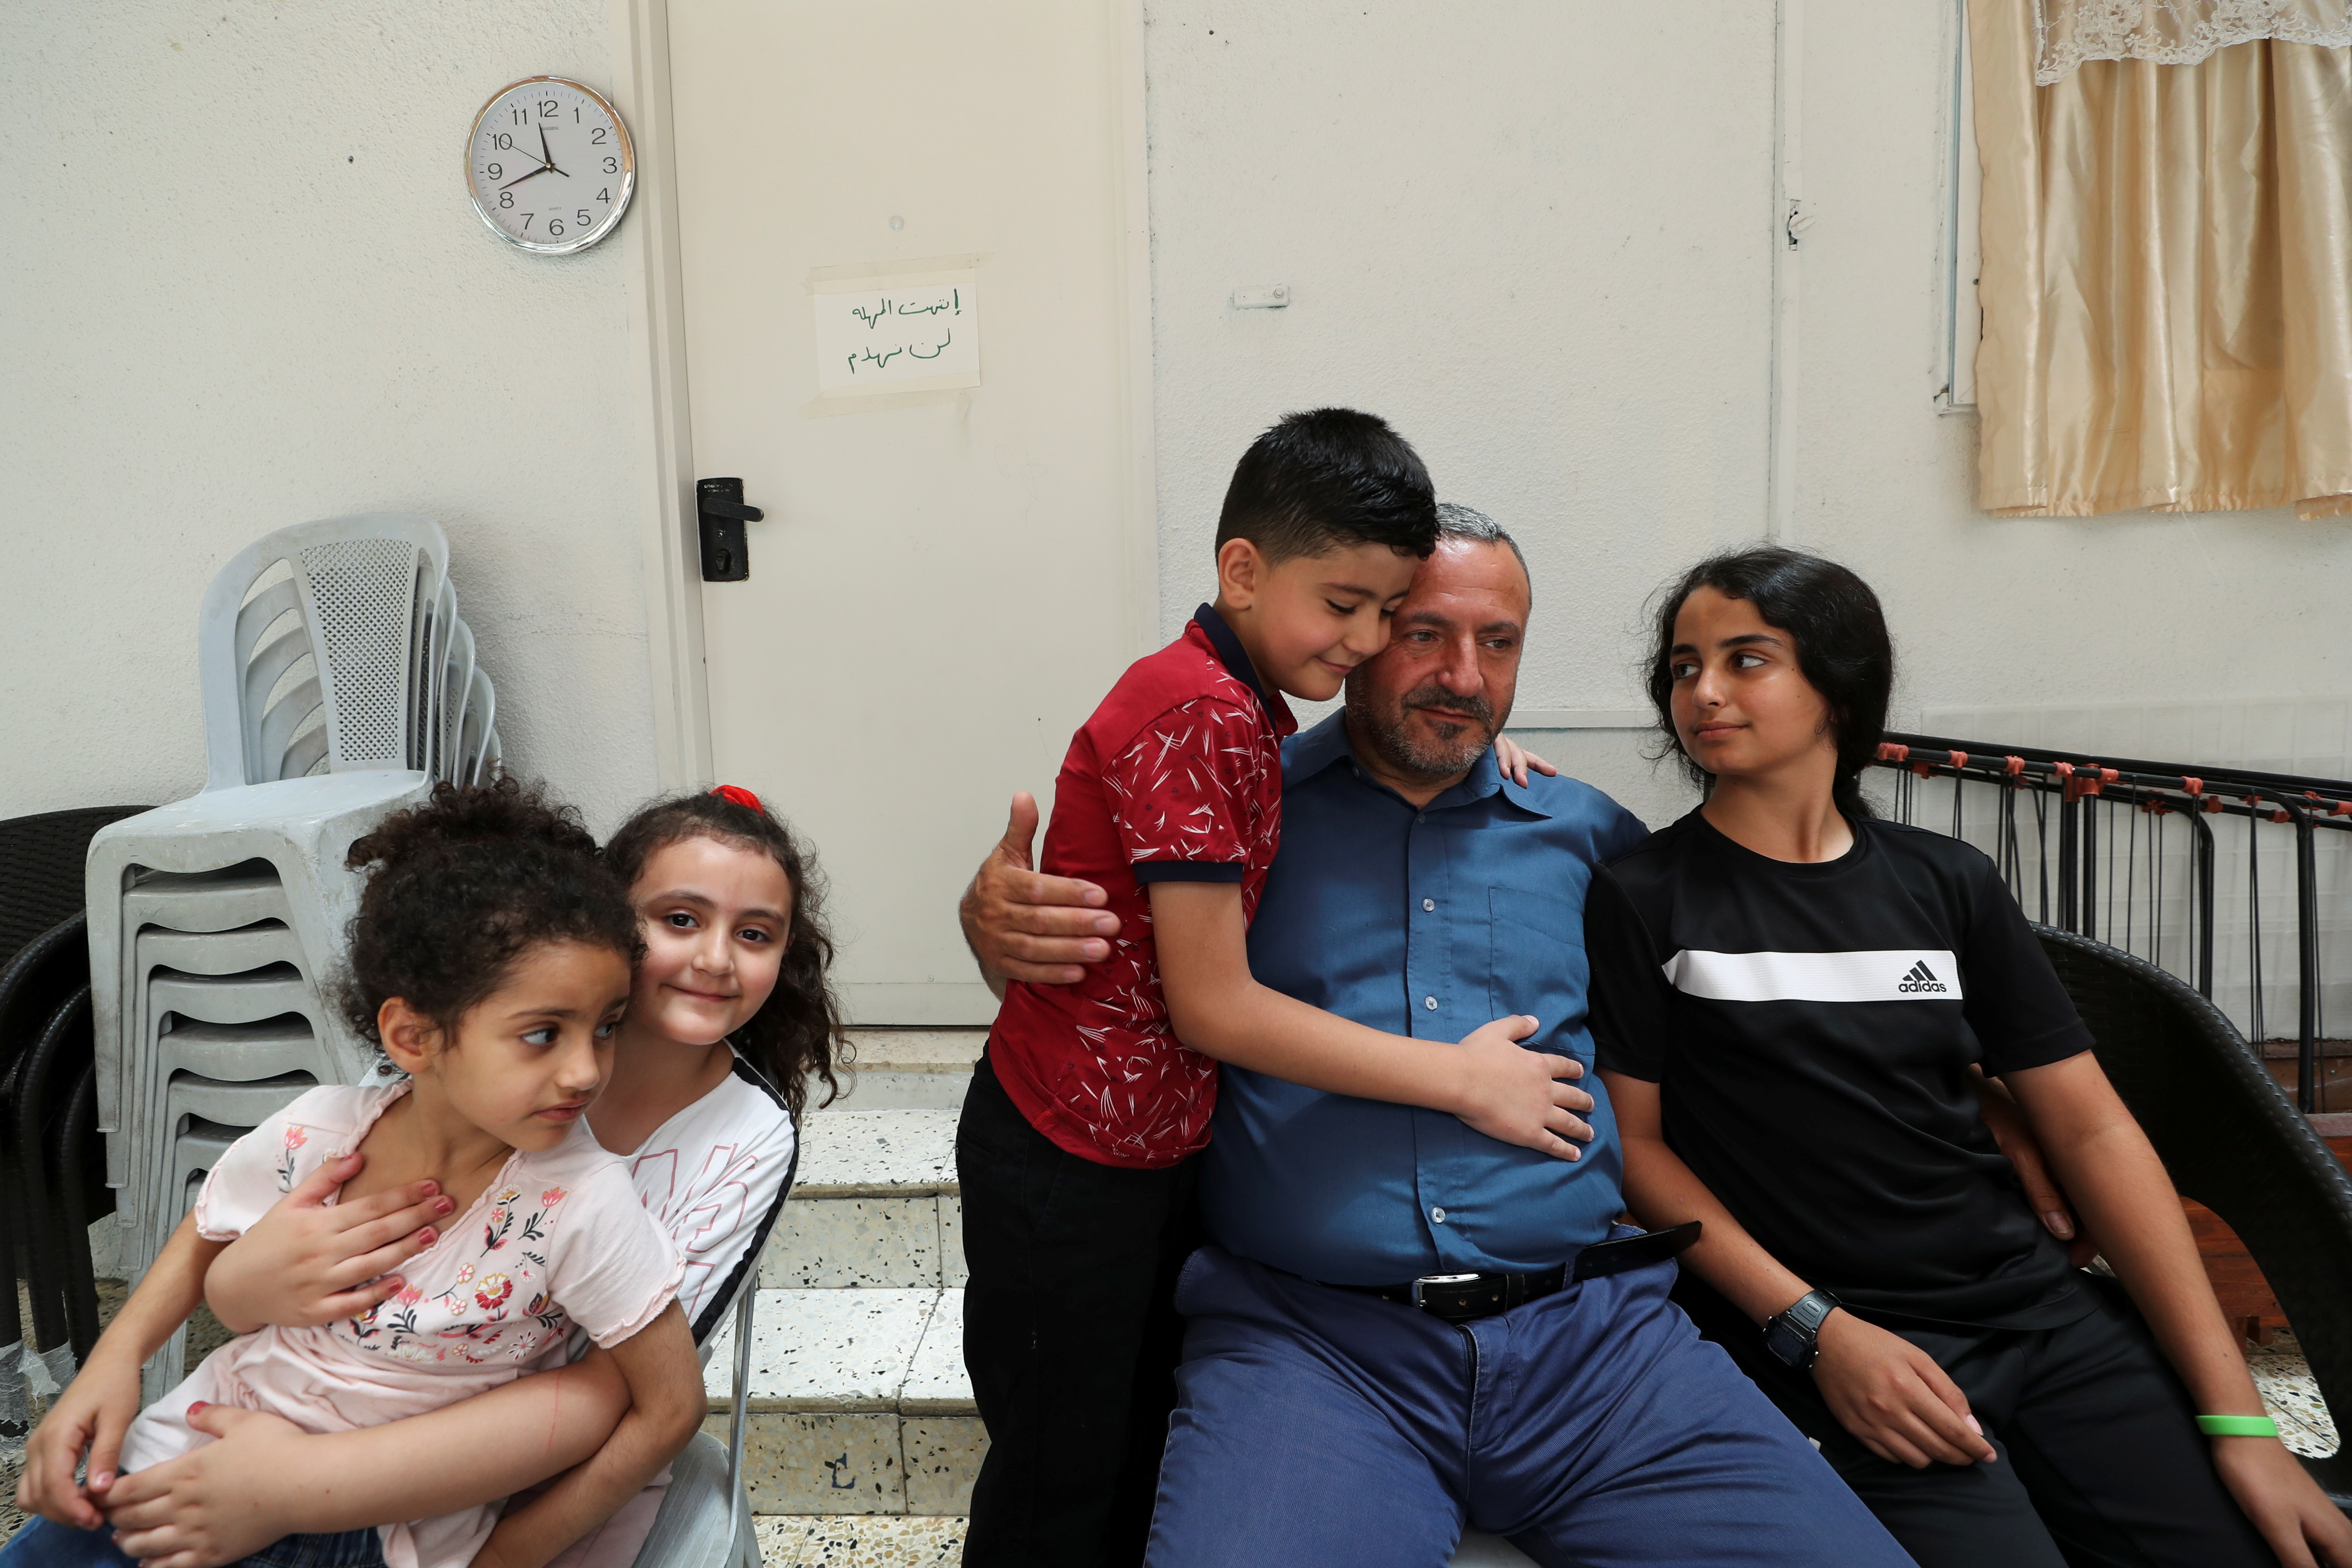 Palestinian resident Nader Abu Diab and his children are seen at their home in Silwan neighbourhood of East Jerusalem